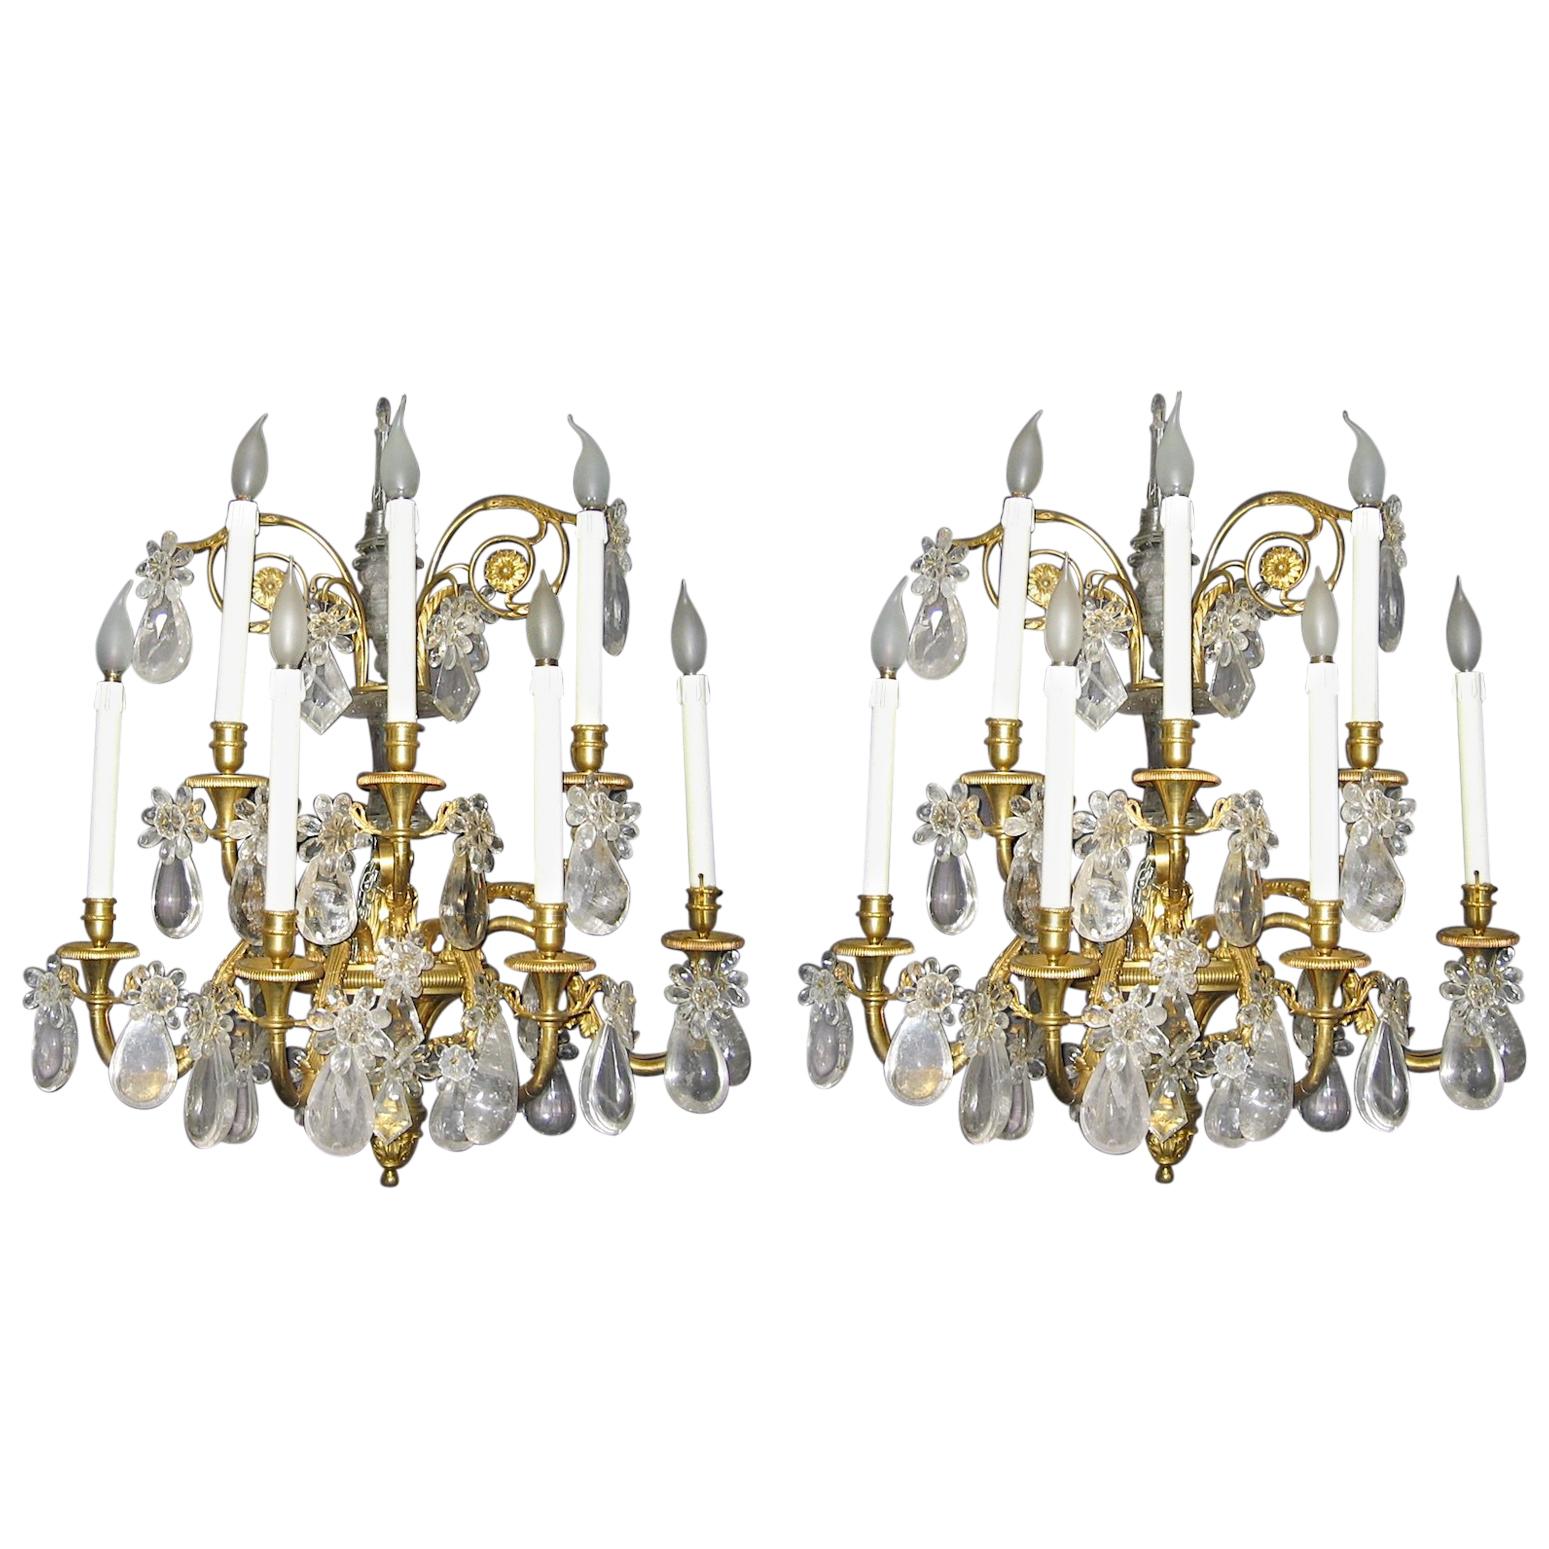 Pair of French Gilt Bronze and Rock Crystal Wall Lights or Sconces Neoclassical